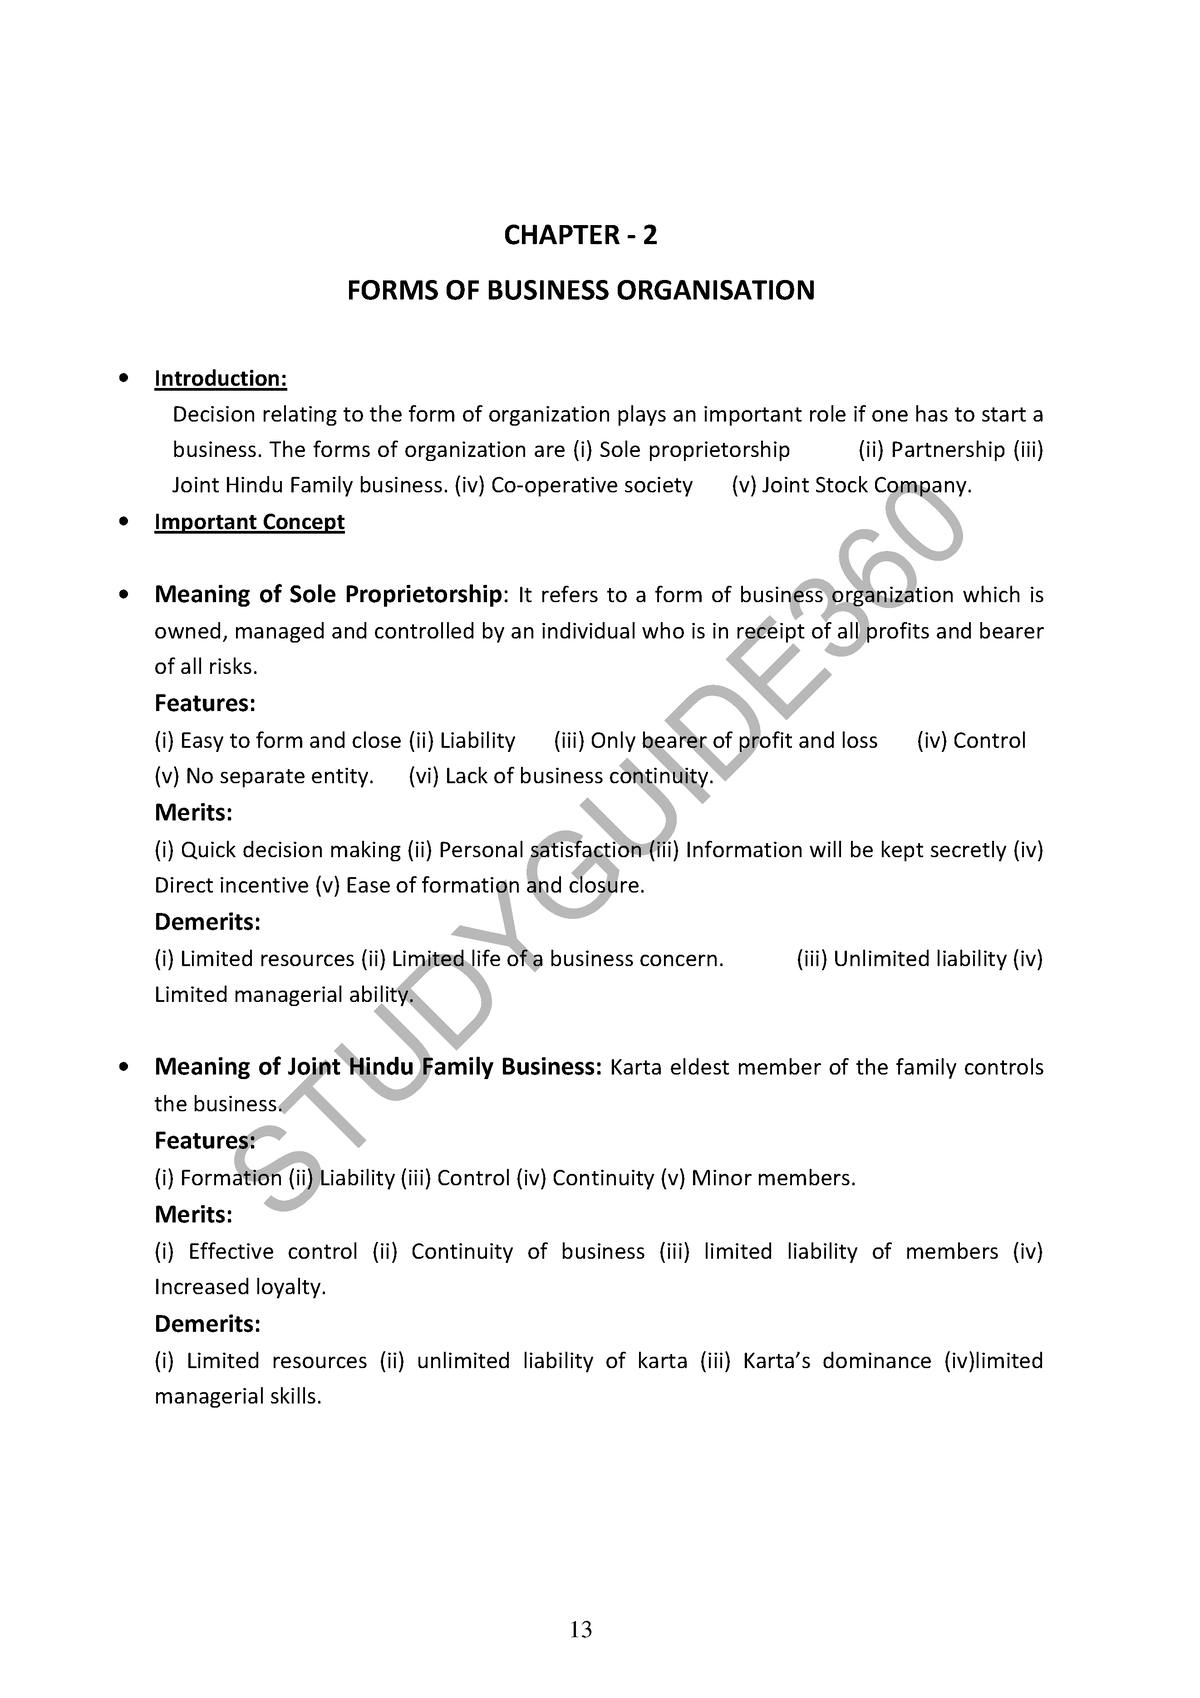 case study questions of forms of business organisation